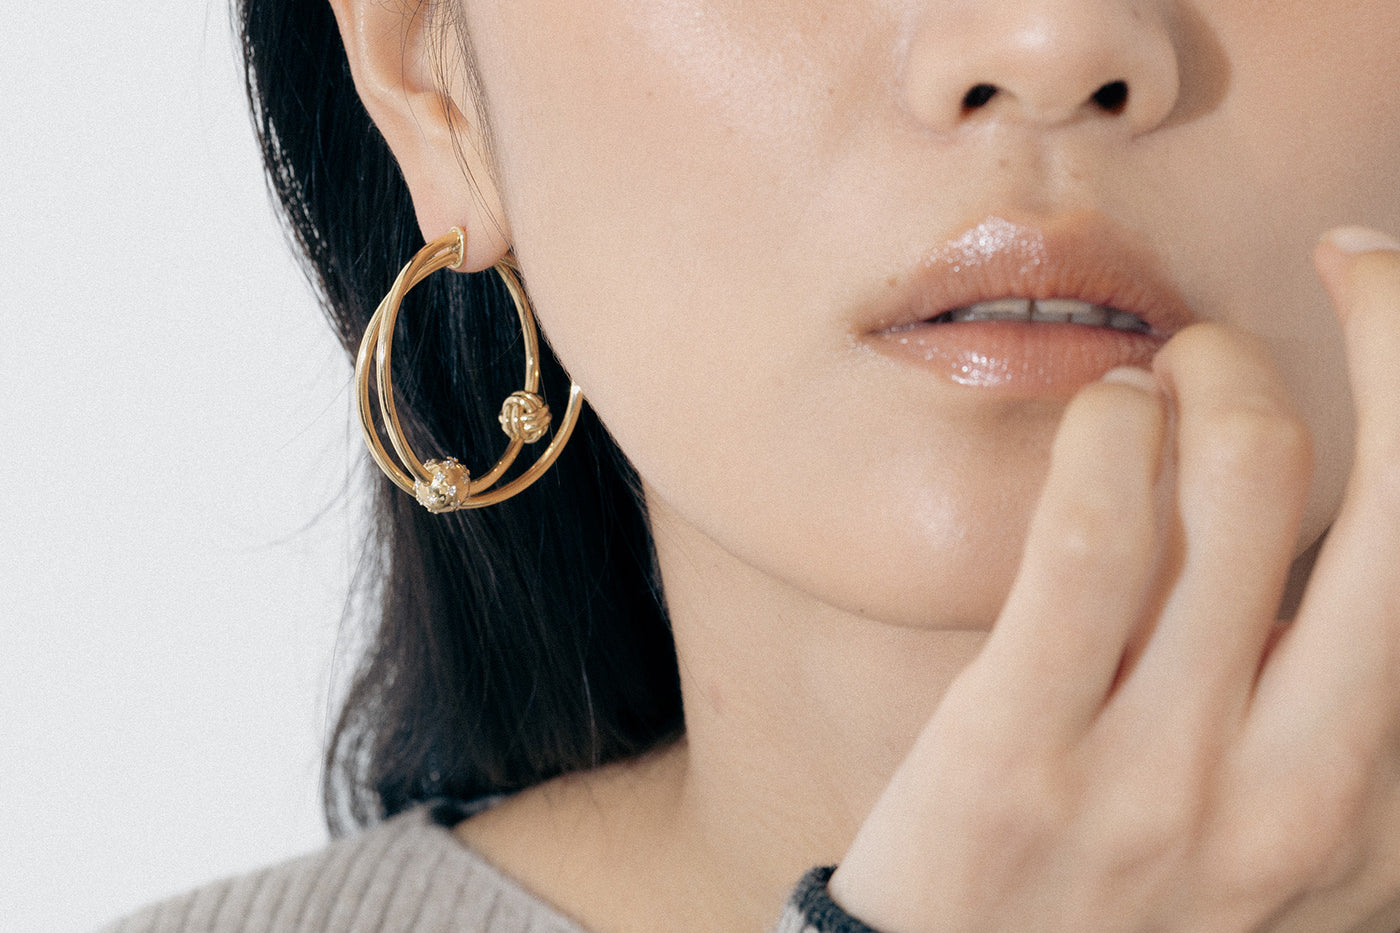 Yellow Gold earrings with linked hoops, a macrame knot, and a Diamond encrusted ball - Model shot